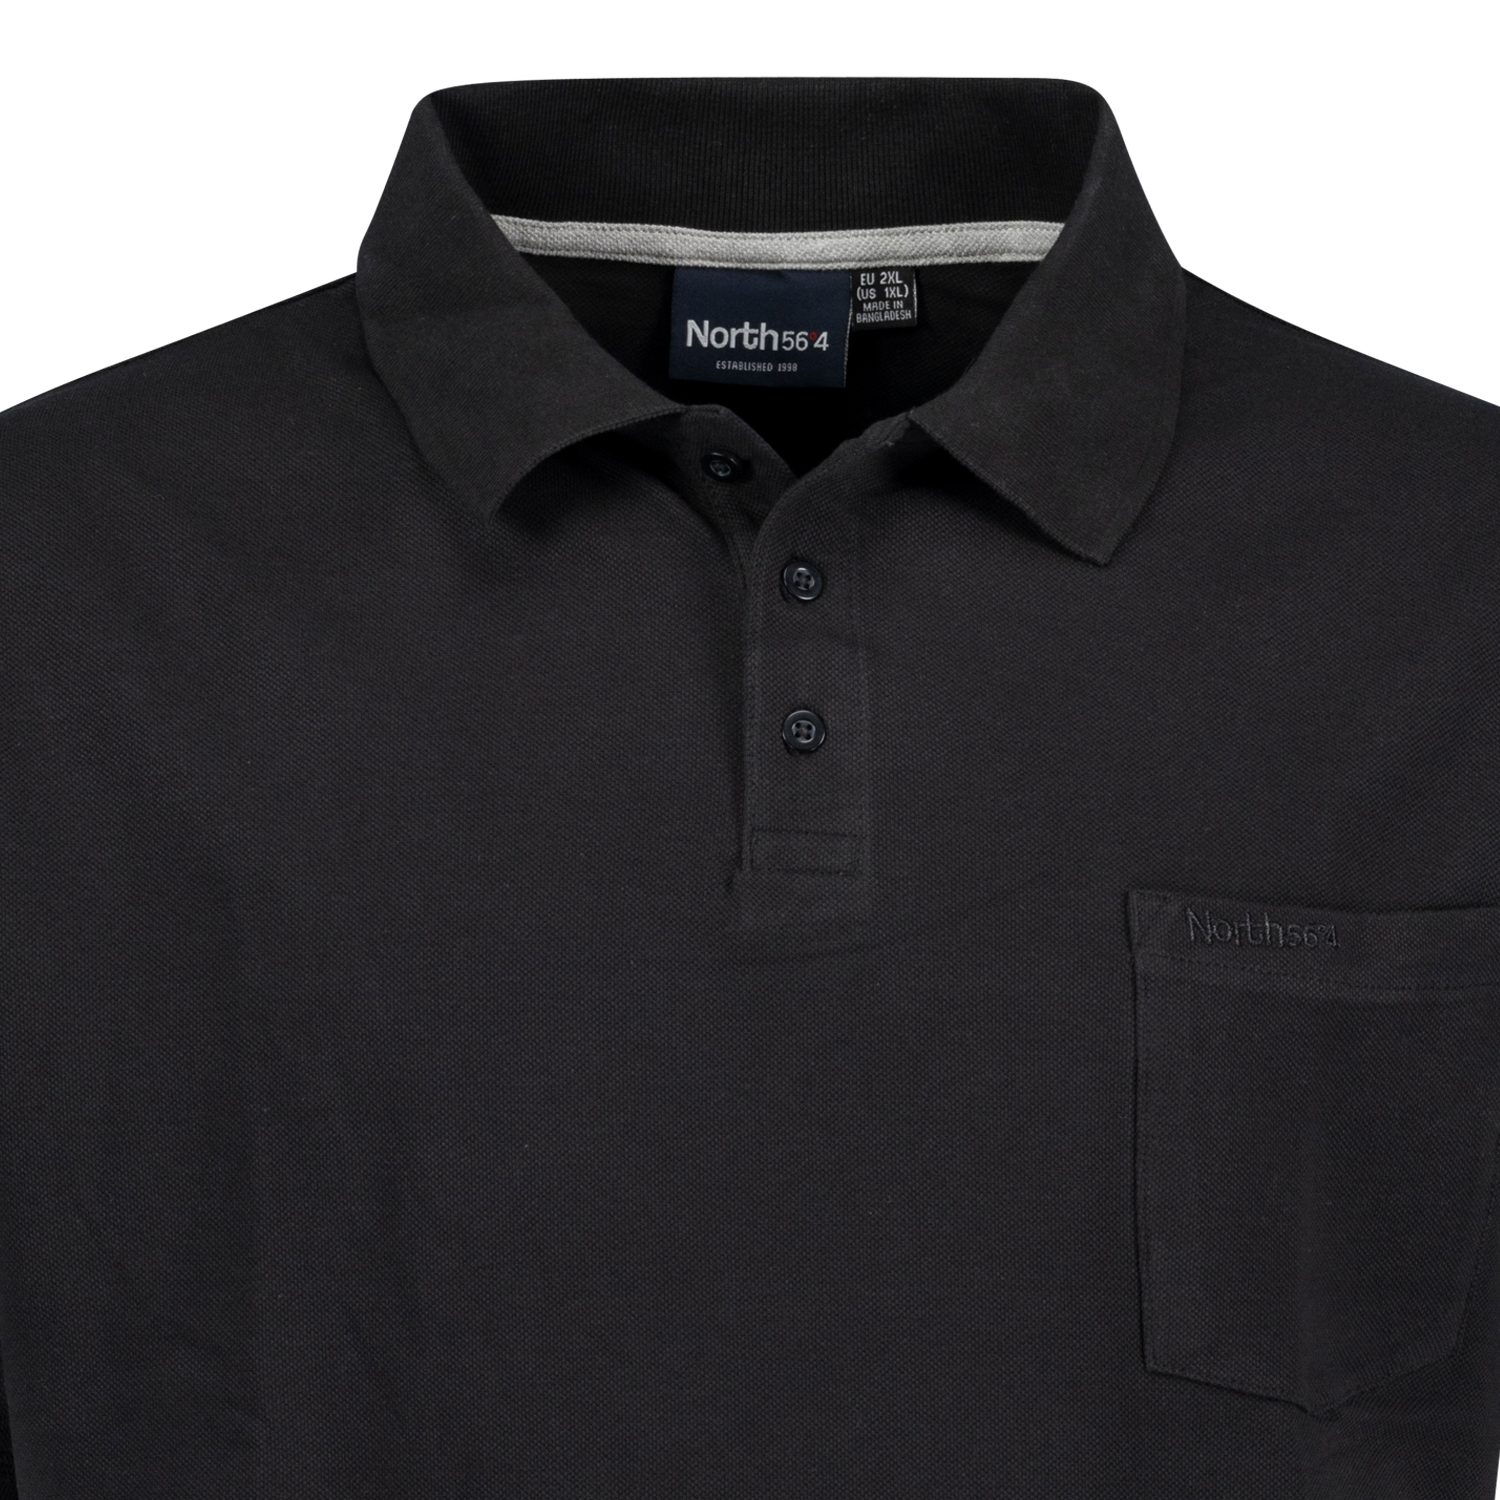 Poloshirt in black by Greyes/North 56°4 in oversizes until 8XL